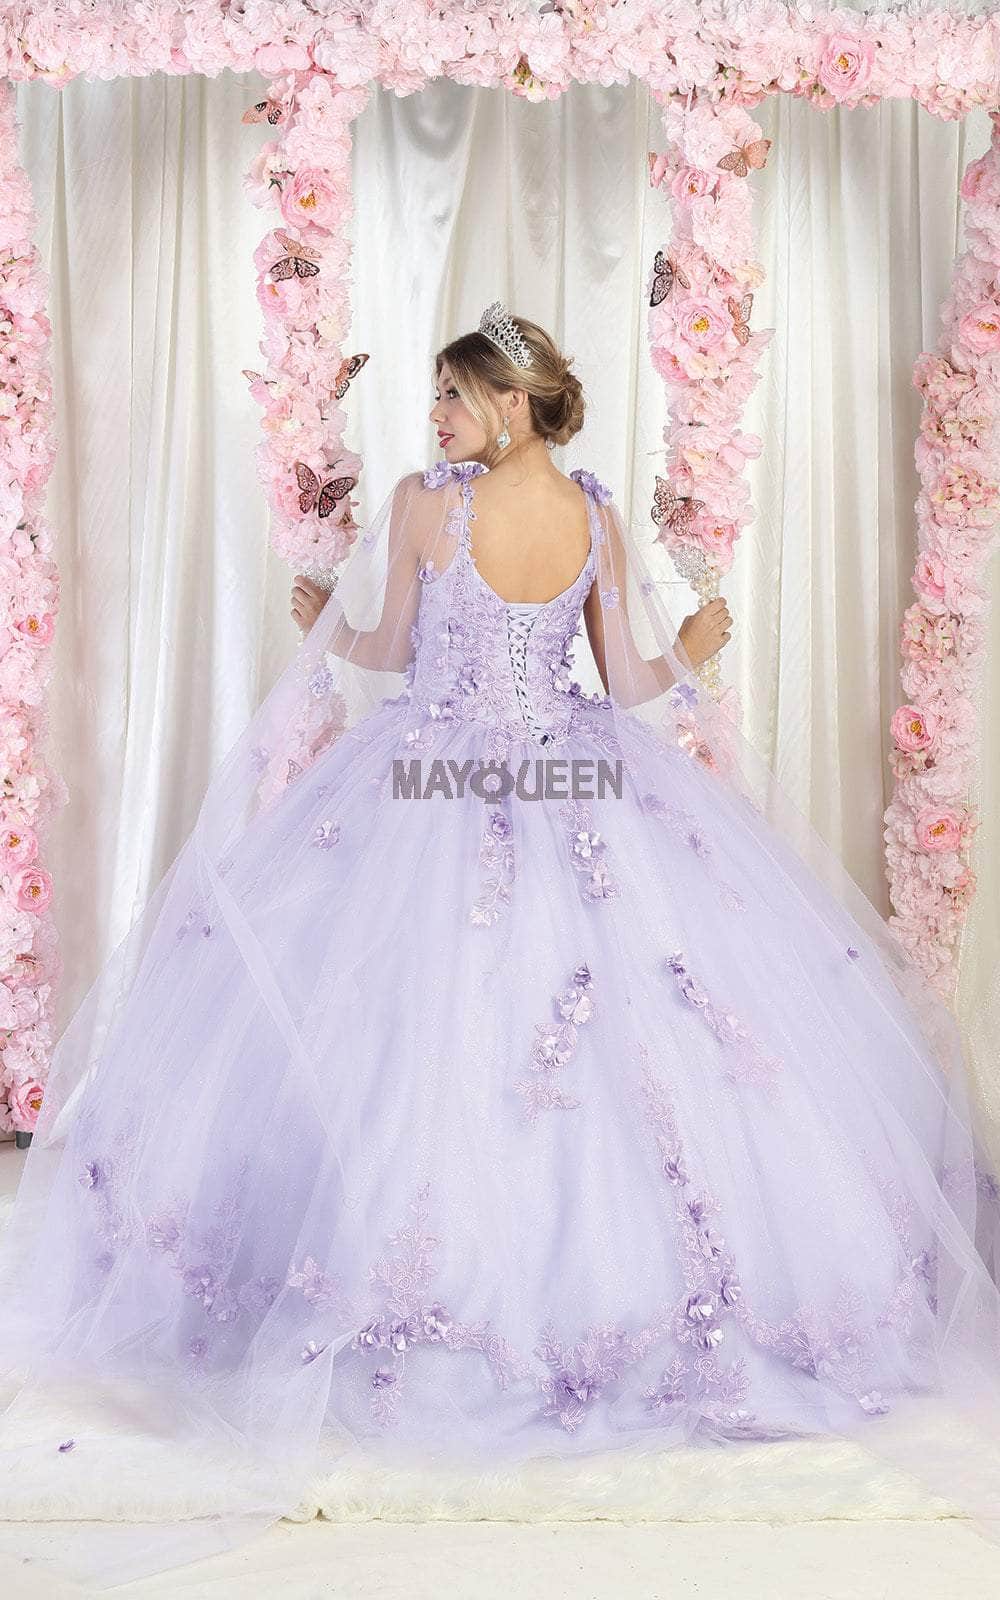 May Queen LK185 - Floral Appliqued Sleeveless Ballgown Special Occasion Dress